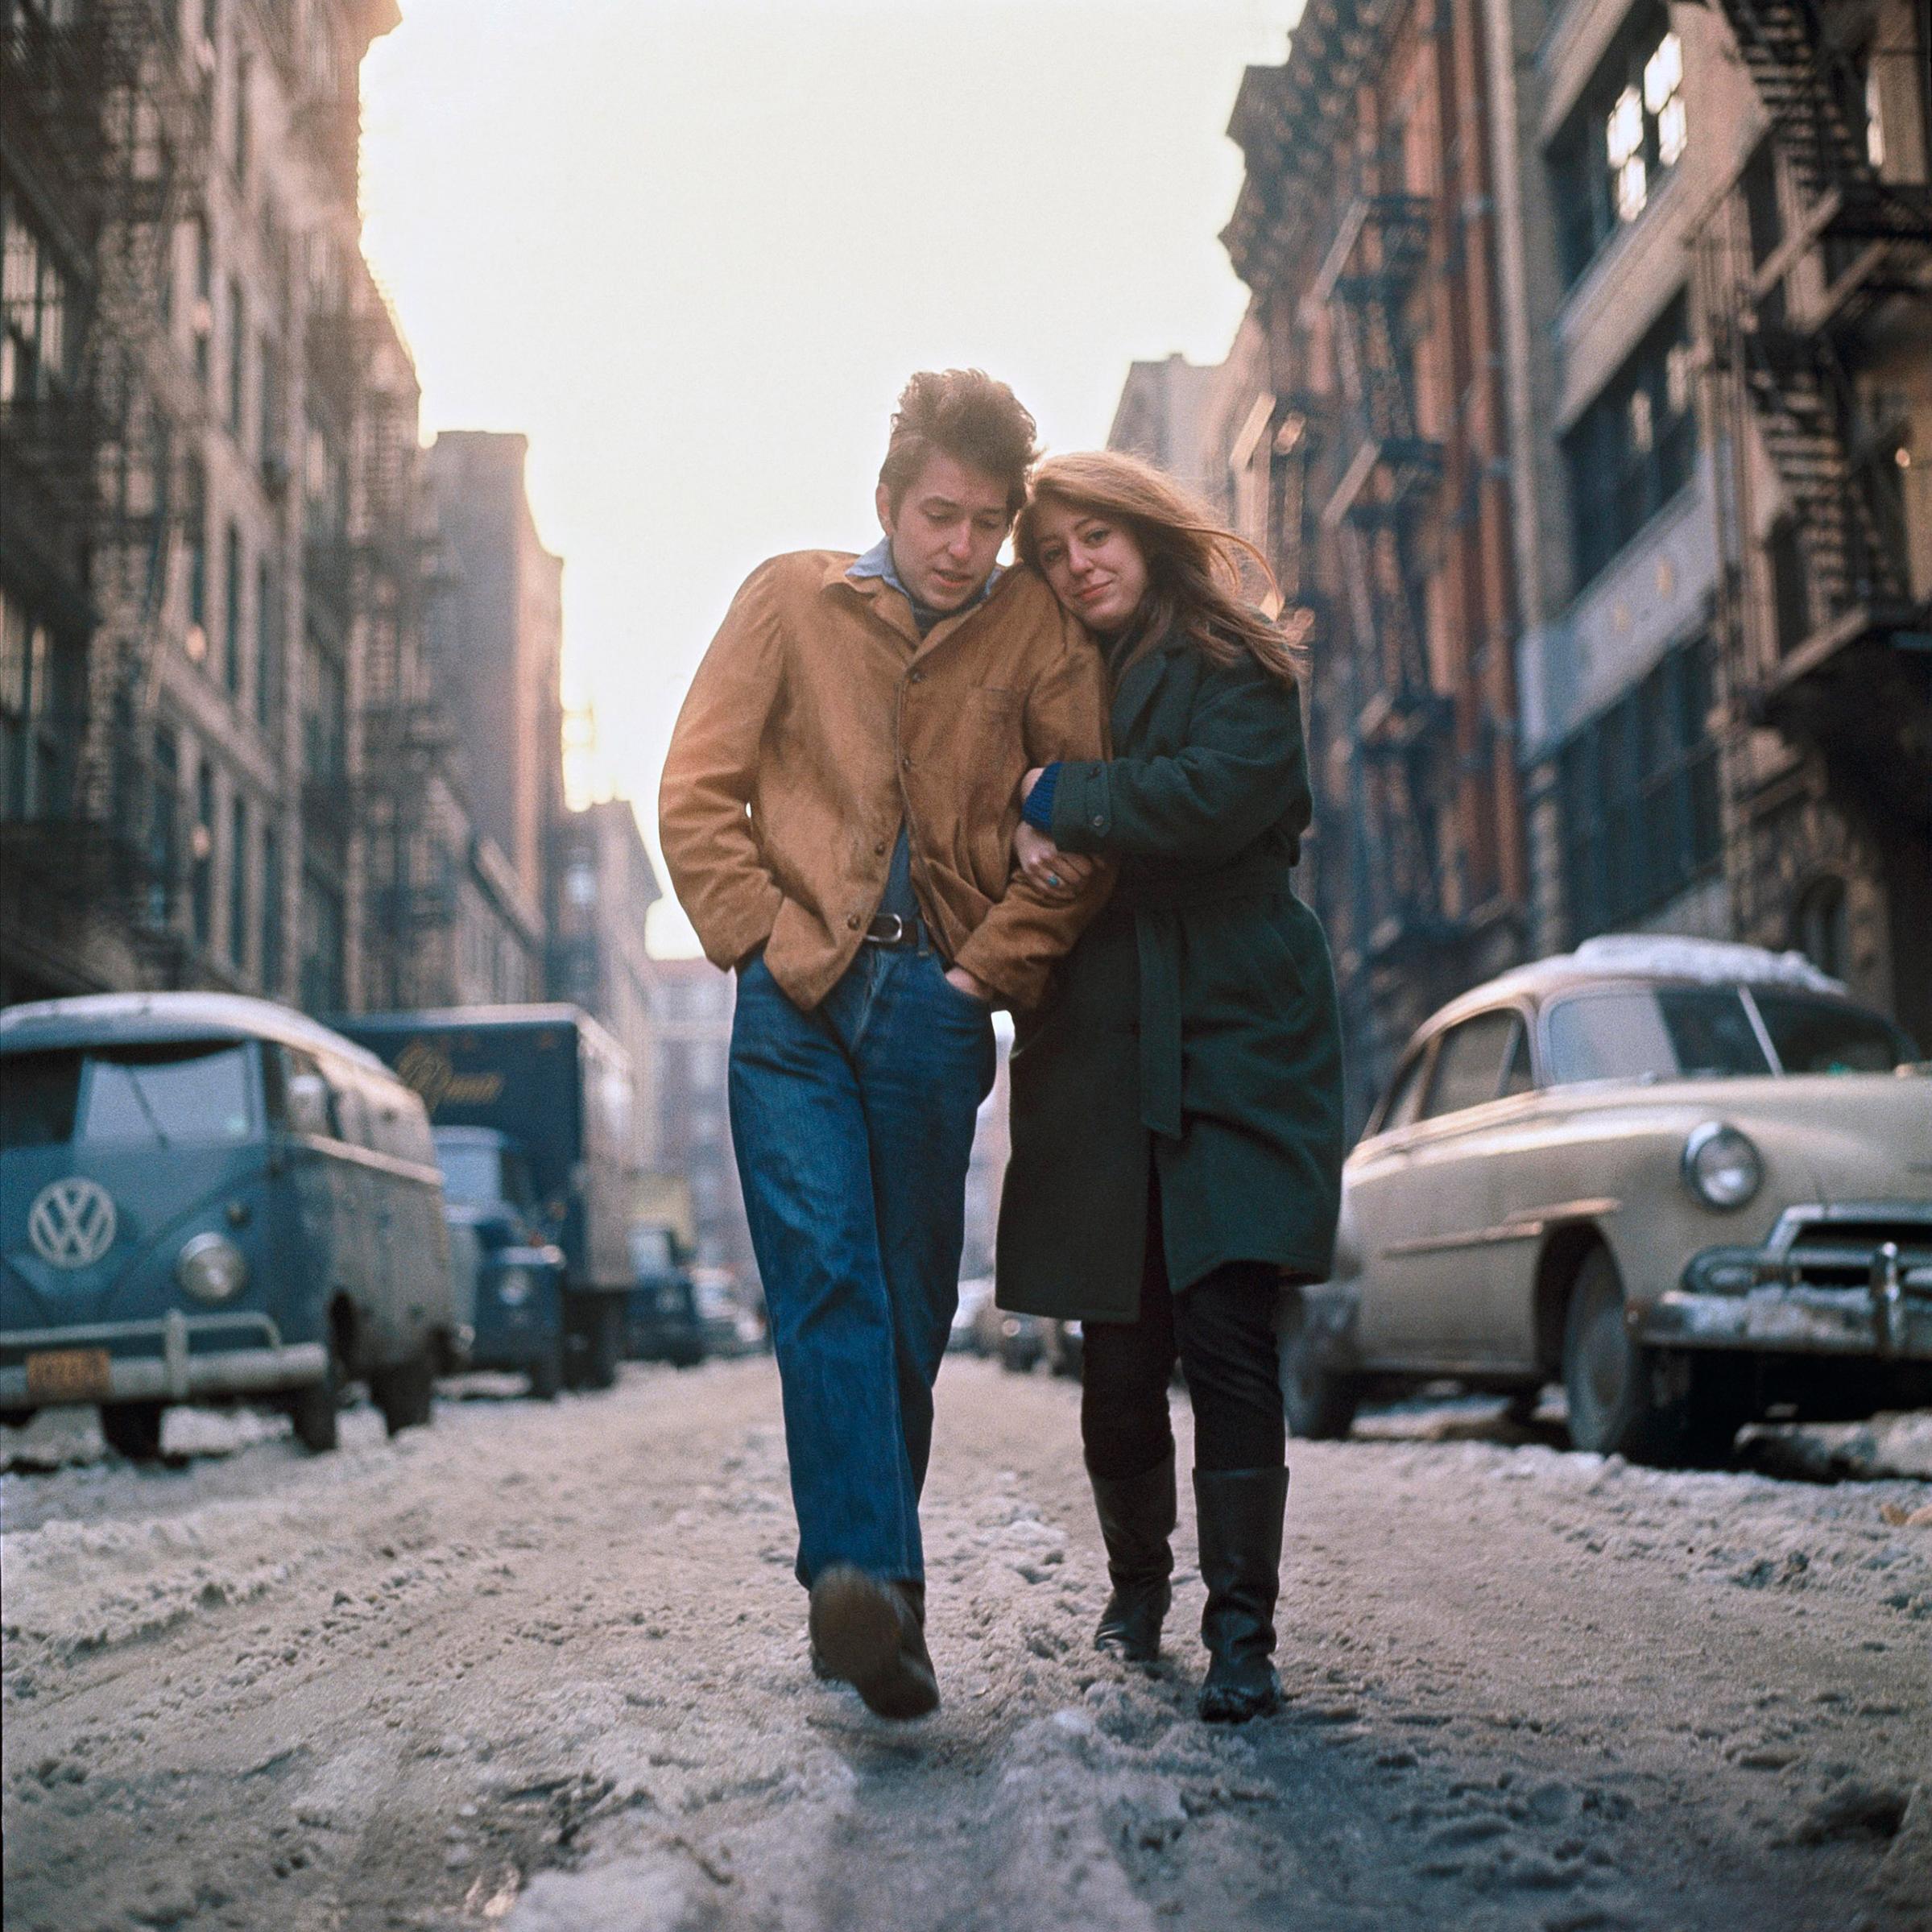 Bob Dylan and Suze Rotolo, 1963. This photo was used as the album cover for 'Freewheelin' with Bob Dylan.'